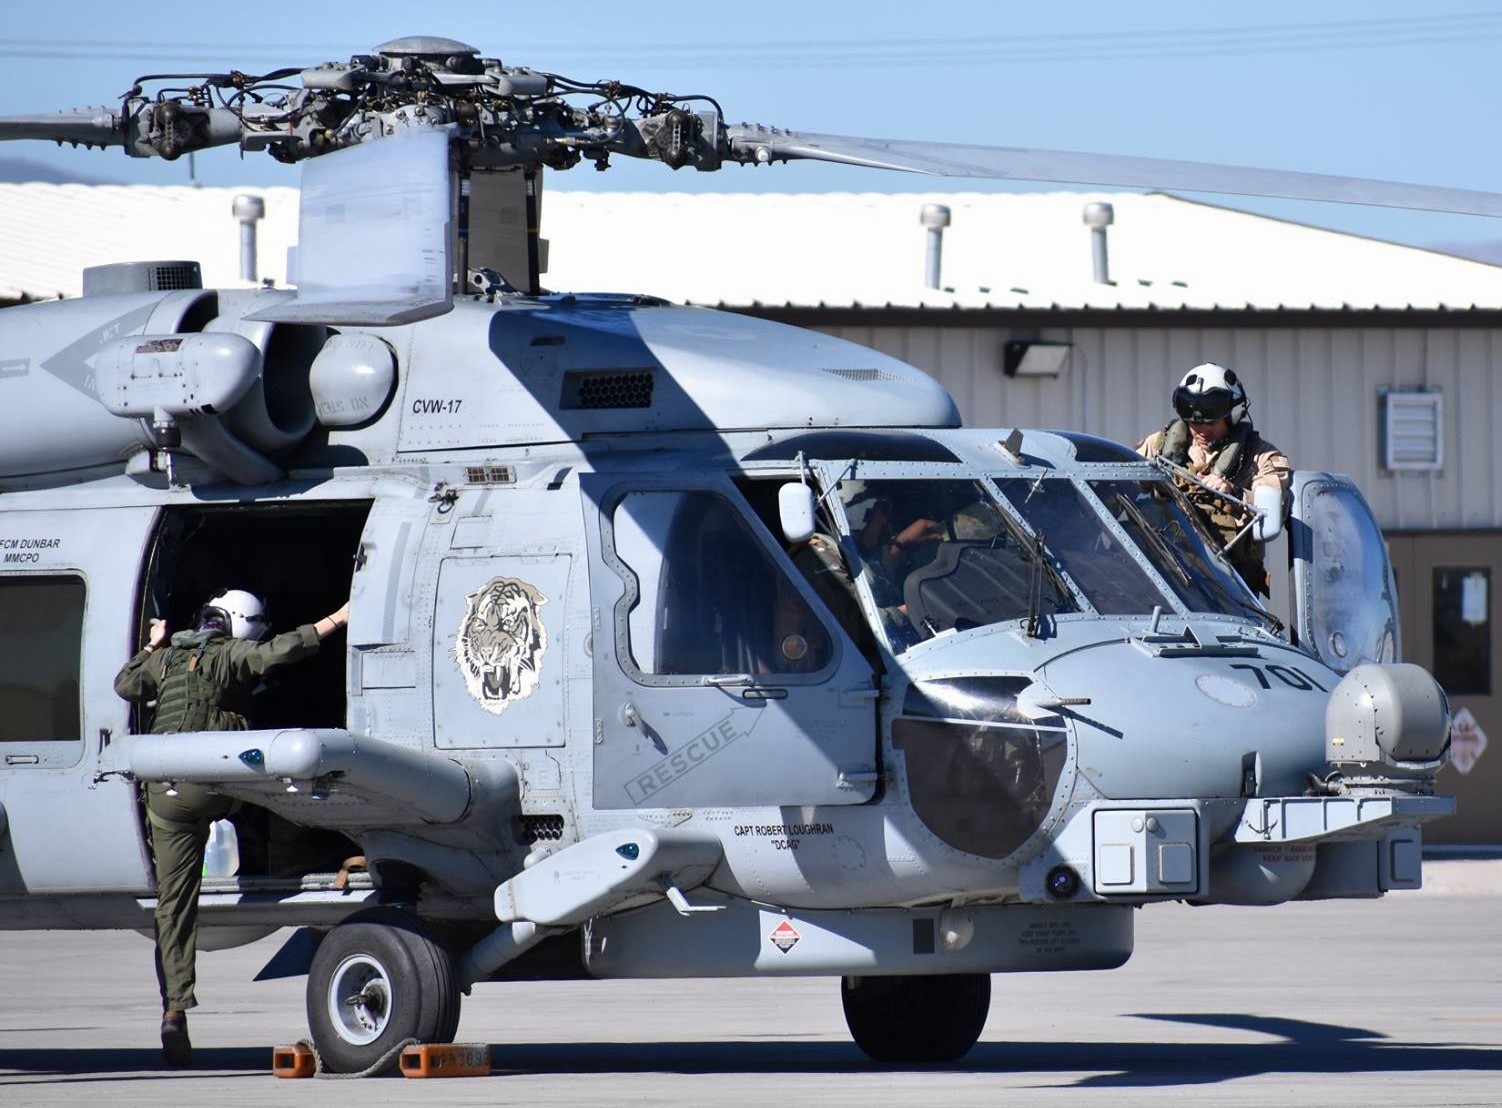 hsm-73 battlecats helicopter maritime strike squadron us navy mh-60r seahawk 2017 78 nas fallon nevada